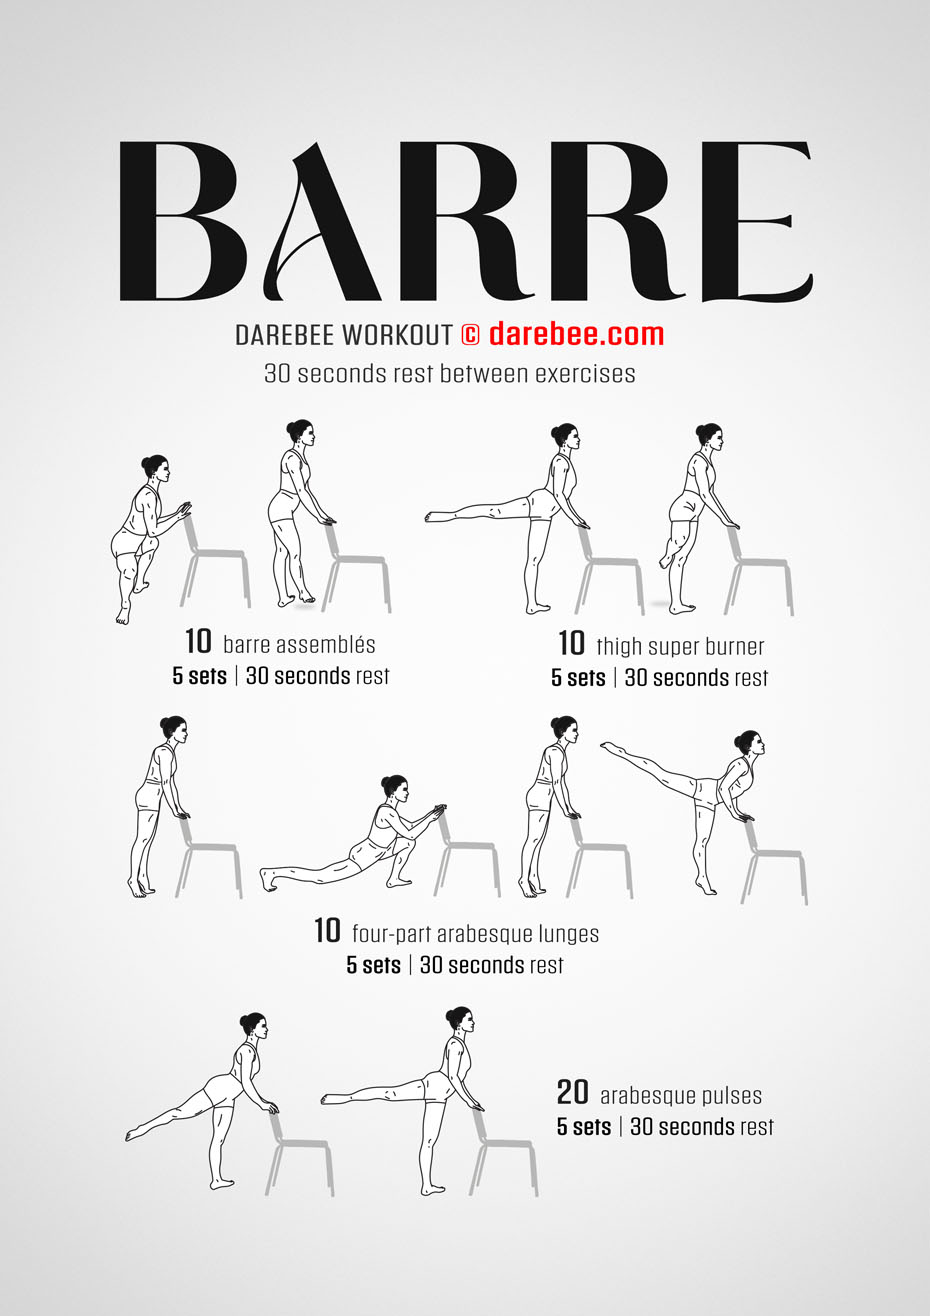 Barre is a Darebee home-fitness lower body agility, flexibility and strength workout you can perform with the help of a chair. 